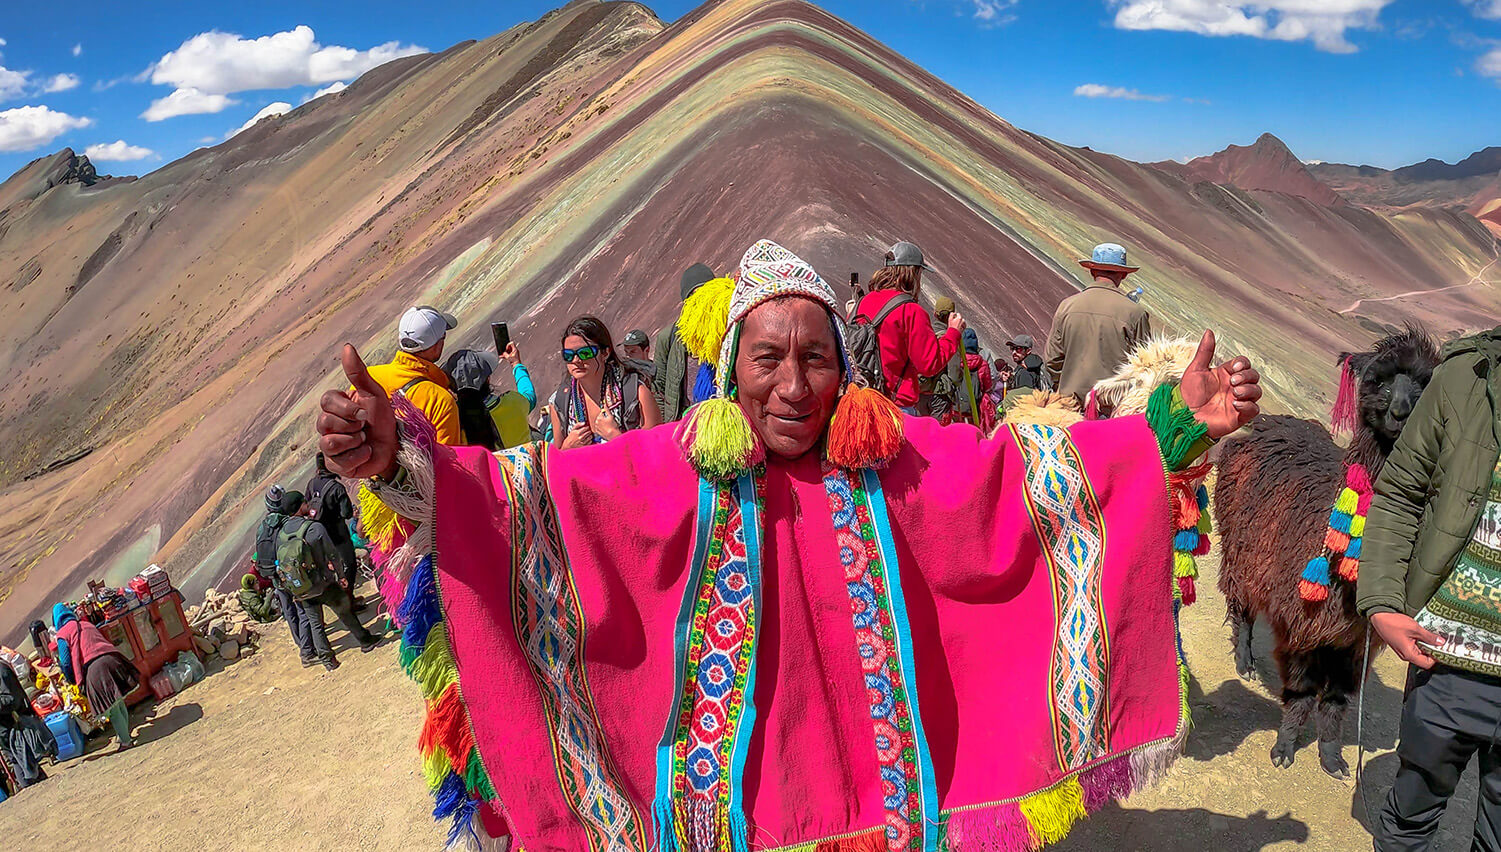 Rainbow Mountain Hike & Red Valley Tour 1 Day